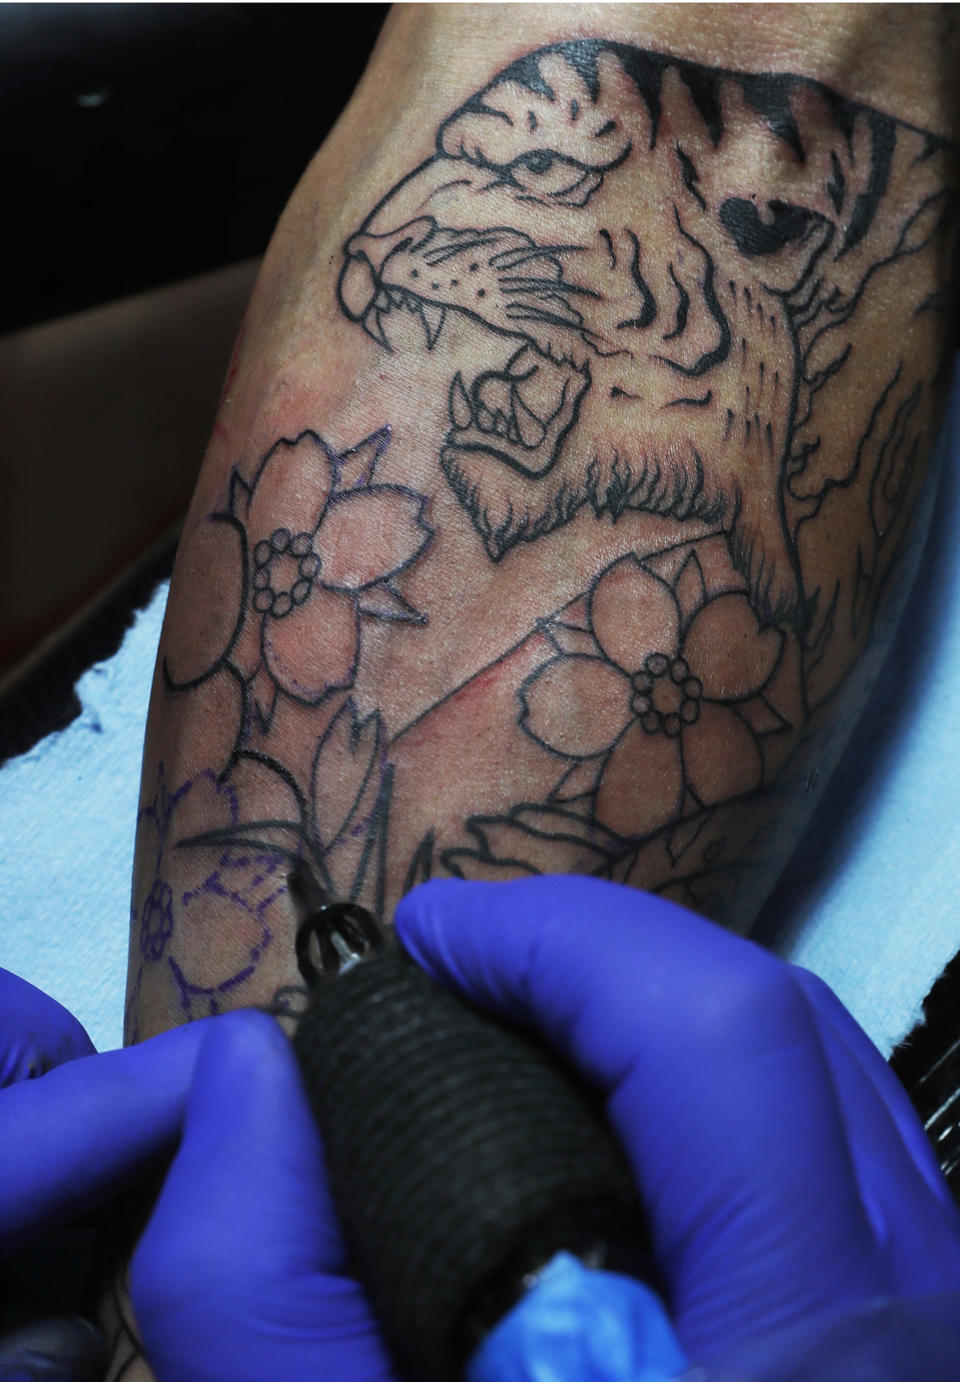 In this April 15, 2019 photo, Liz Ruiz has the tattoo of a tiger inked on her arm at the Corona Tattoo parlor in Mexico City. "Every animal has a meaning but when you find the most beautiful animal in the world, his beauty, strength, royalty and freedom, you will understand the significance behind the tiger tattoo." Ruiz said. (AP Photo/Marco Ugarte)